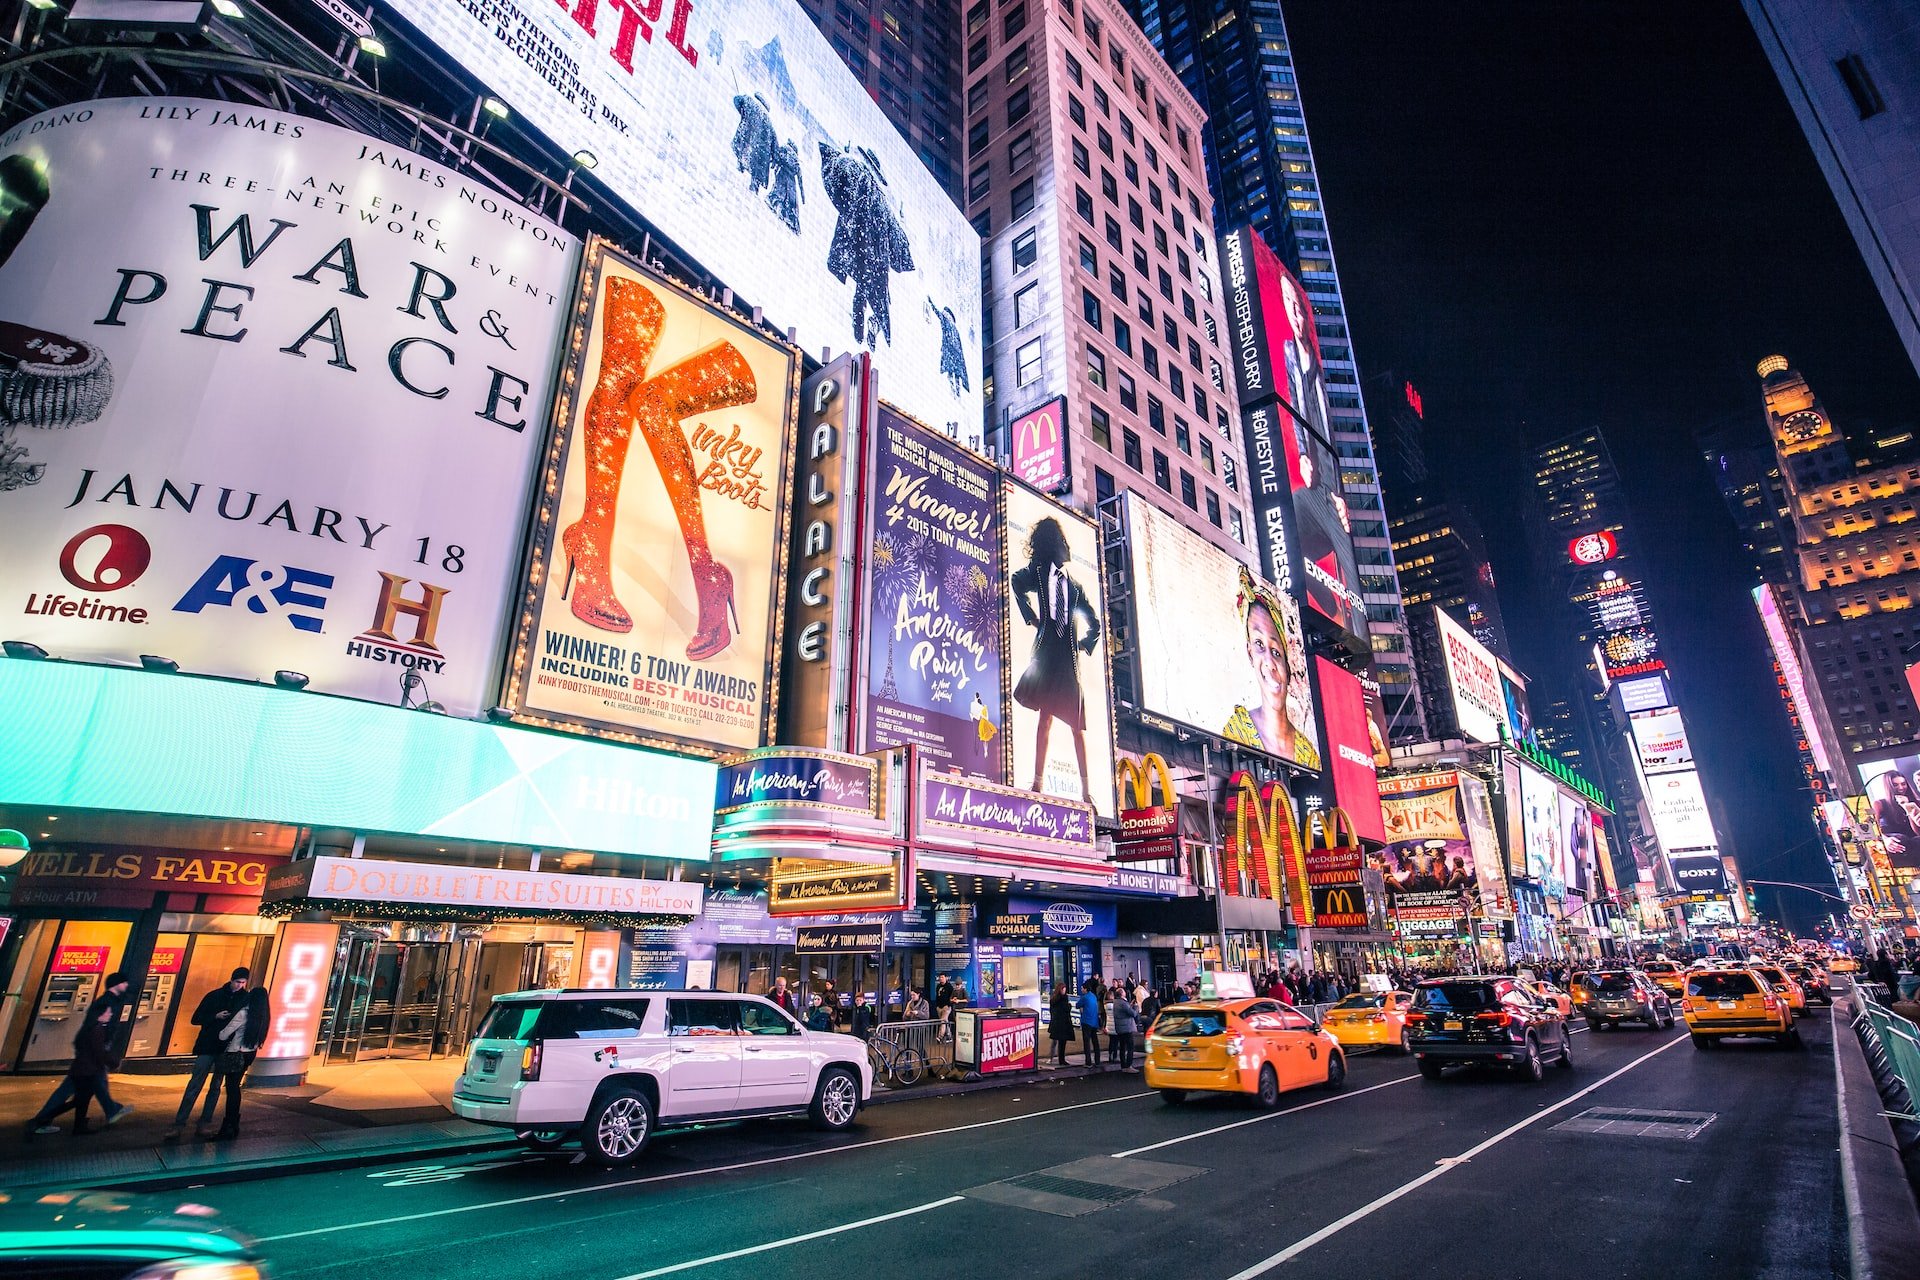 Broadway Tickets with These Tips